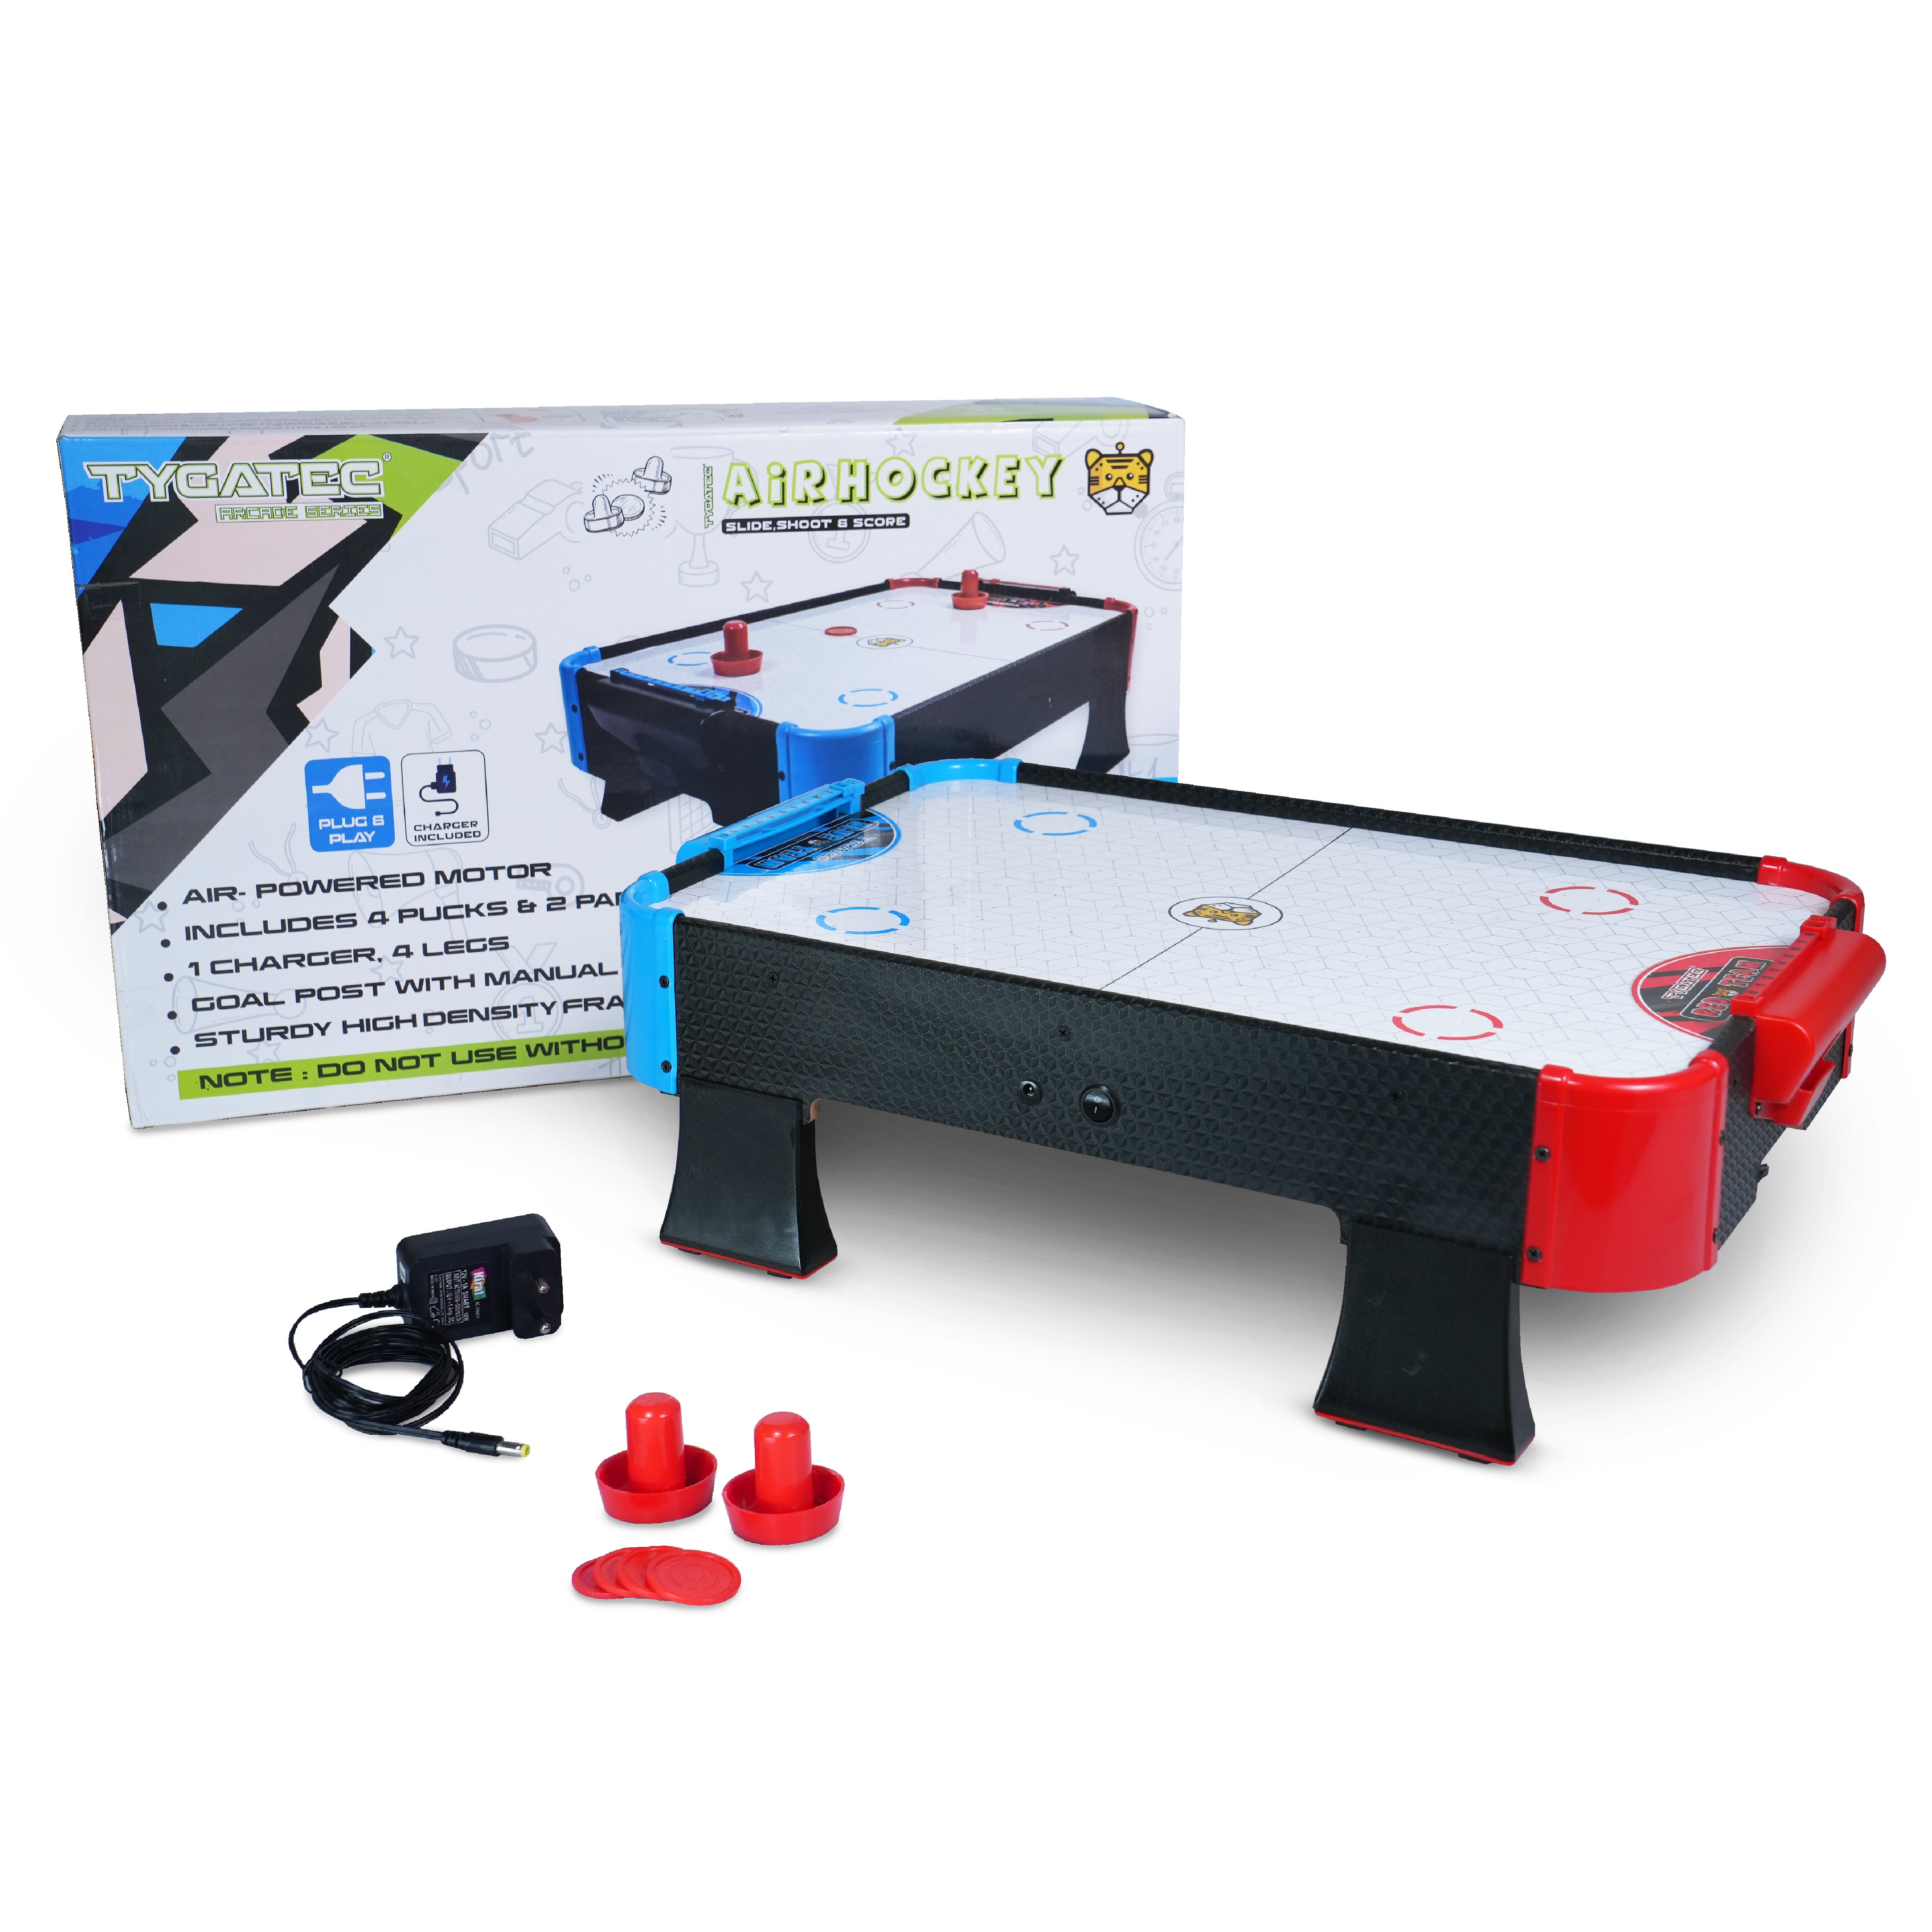 TYGATEC- Air Hockey Table Top Indoor Game for Kids with Score Counter | Gift for Children Ages 3+